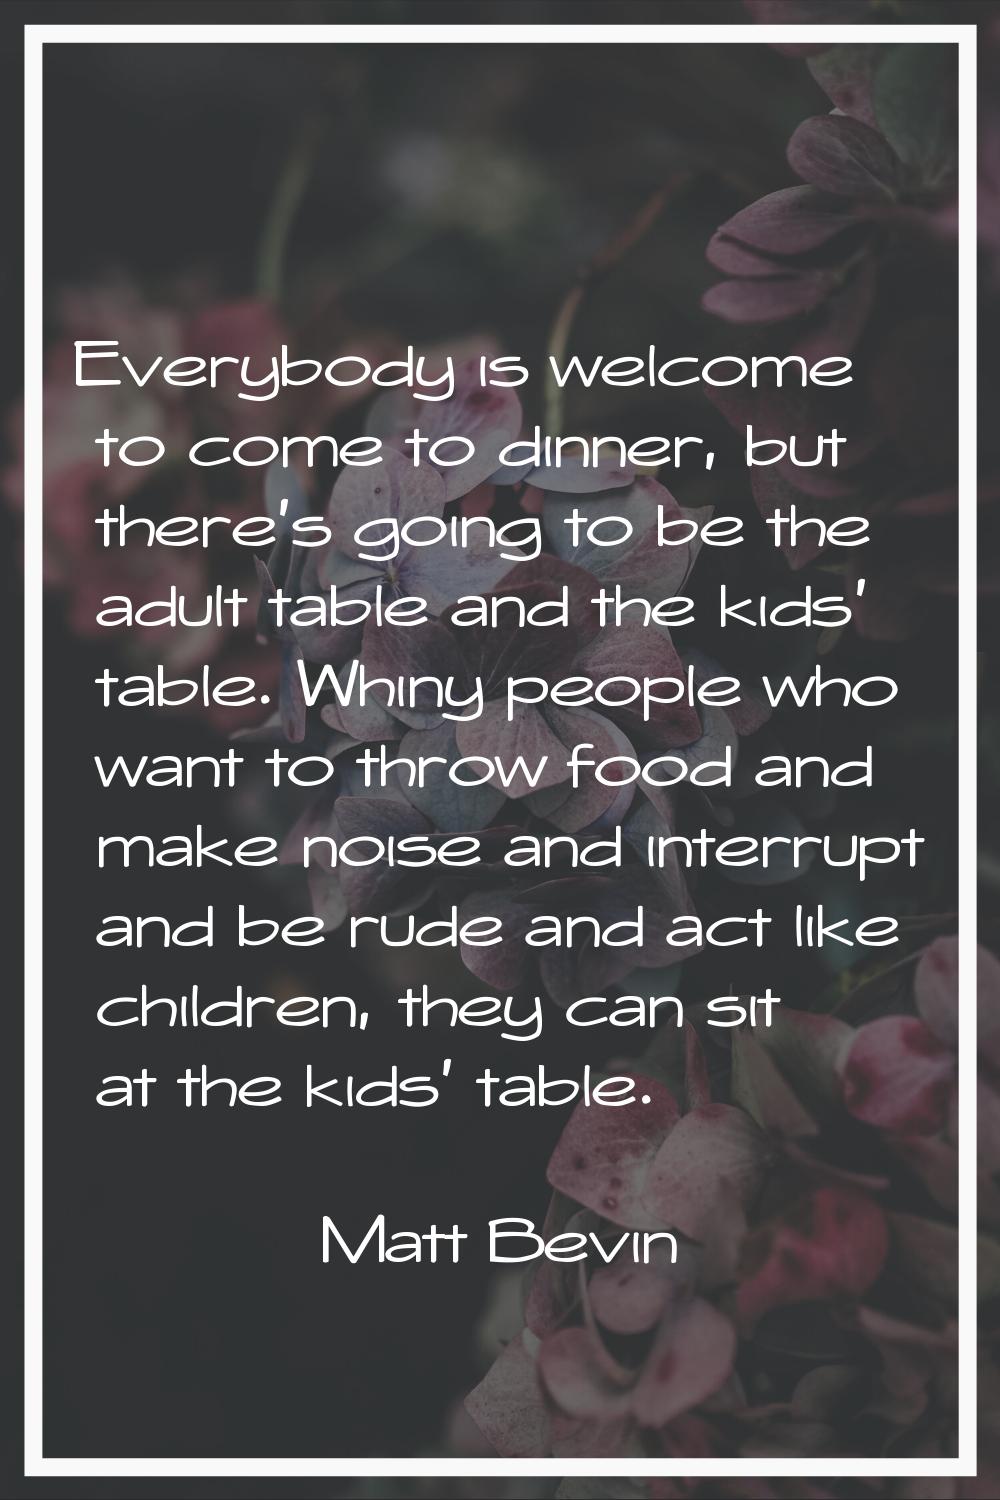 Everybody is welcome to come to dinner, but there's going to be the adult table and the kids' table